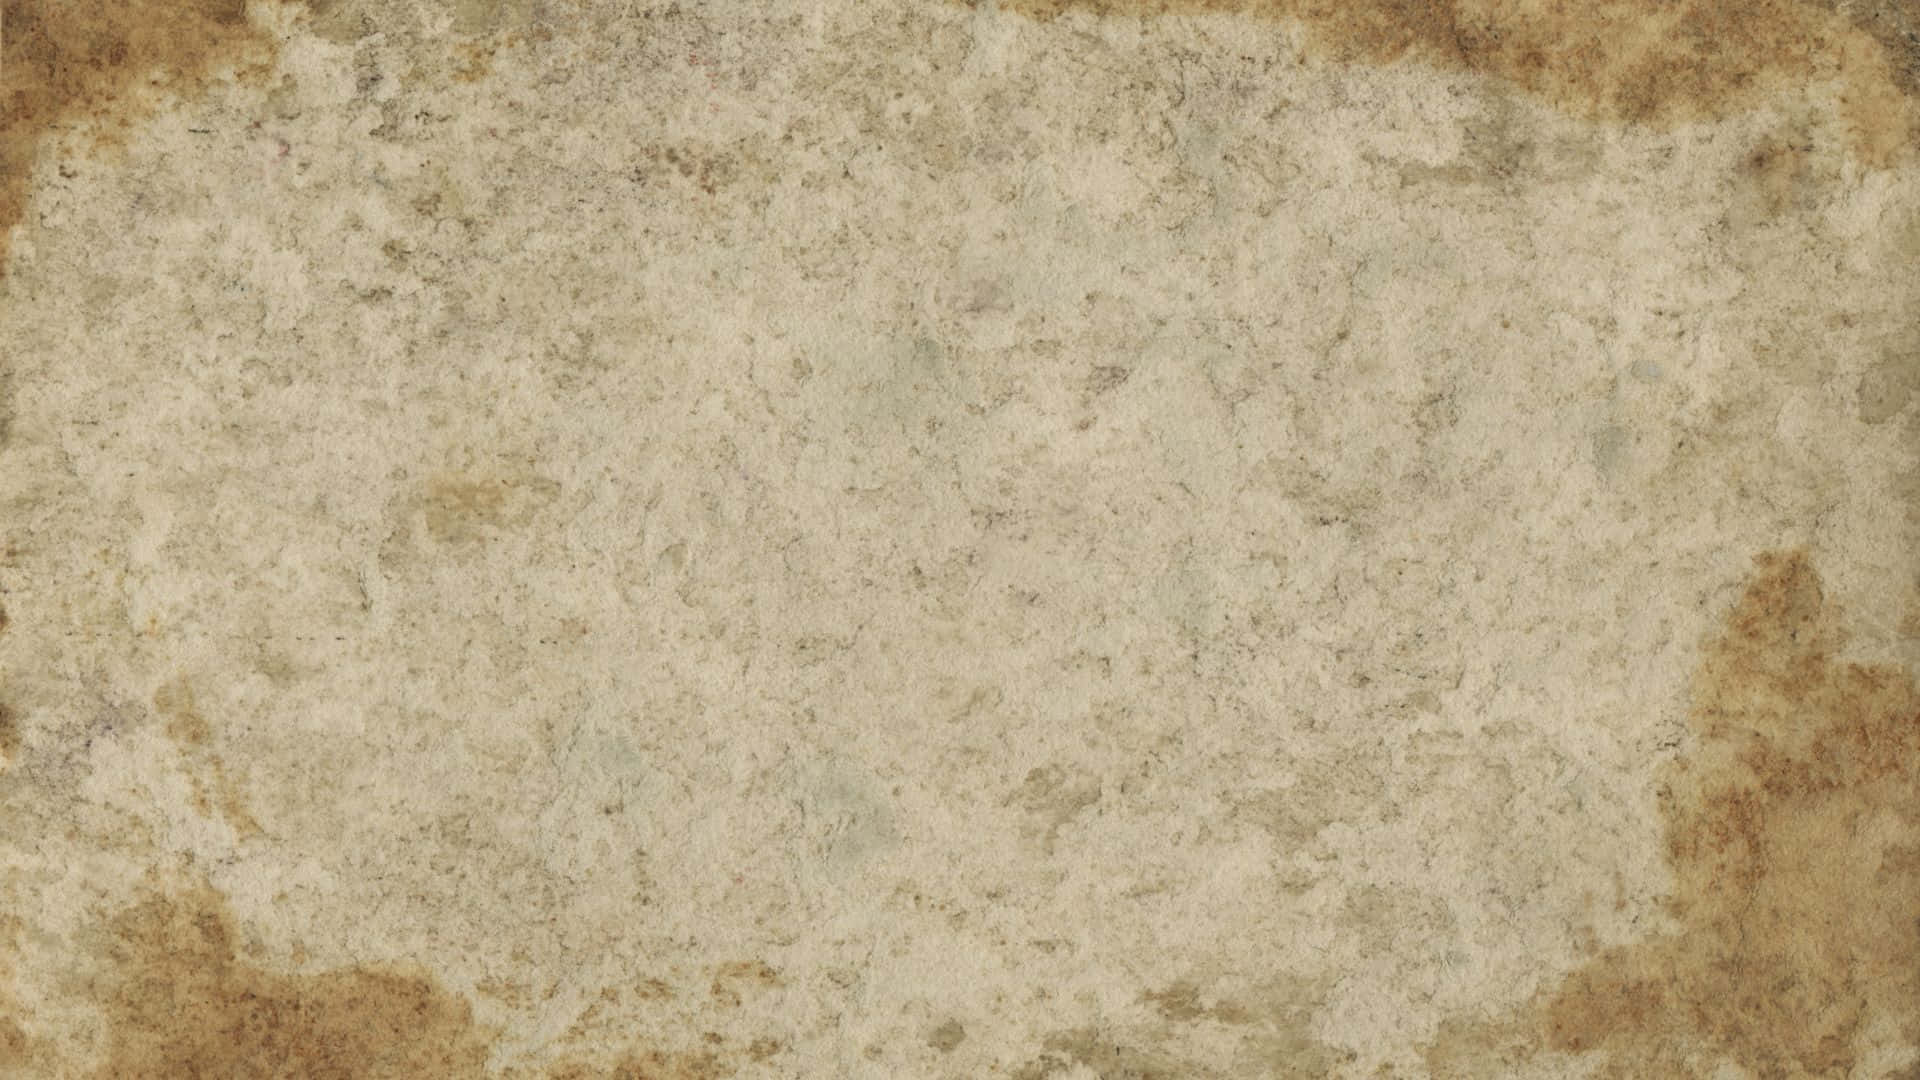 Detailed image of a textured old paper